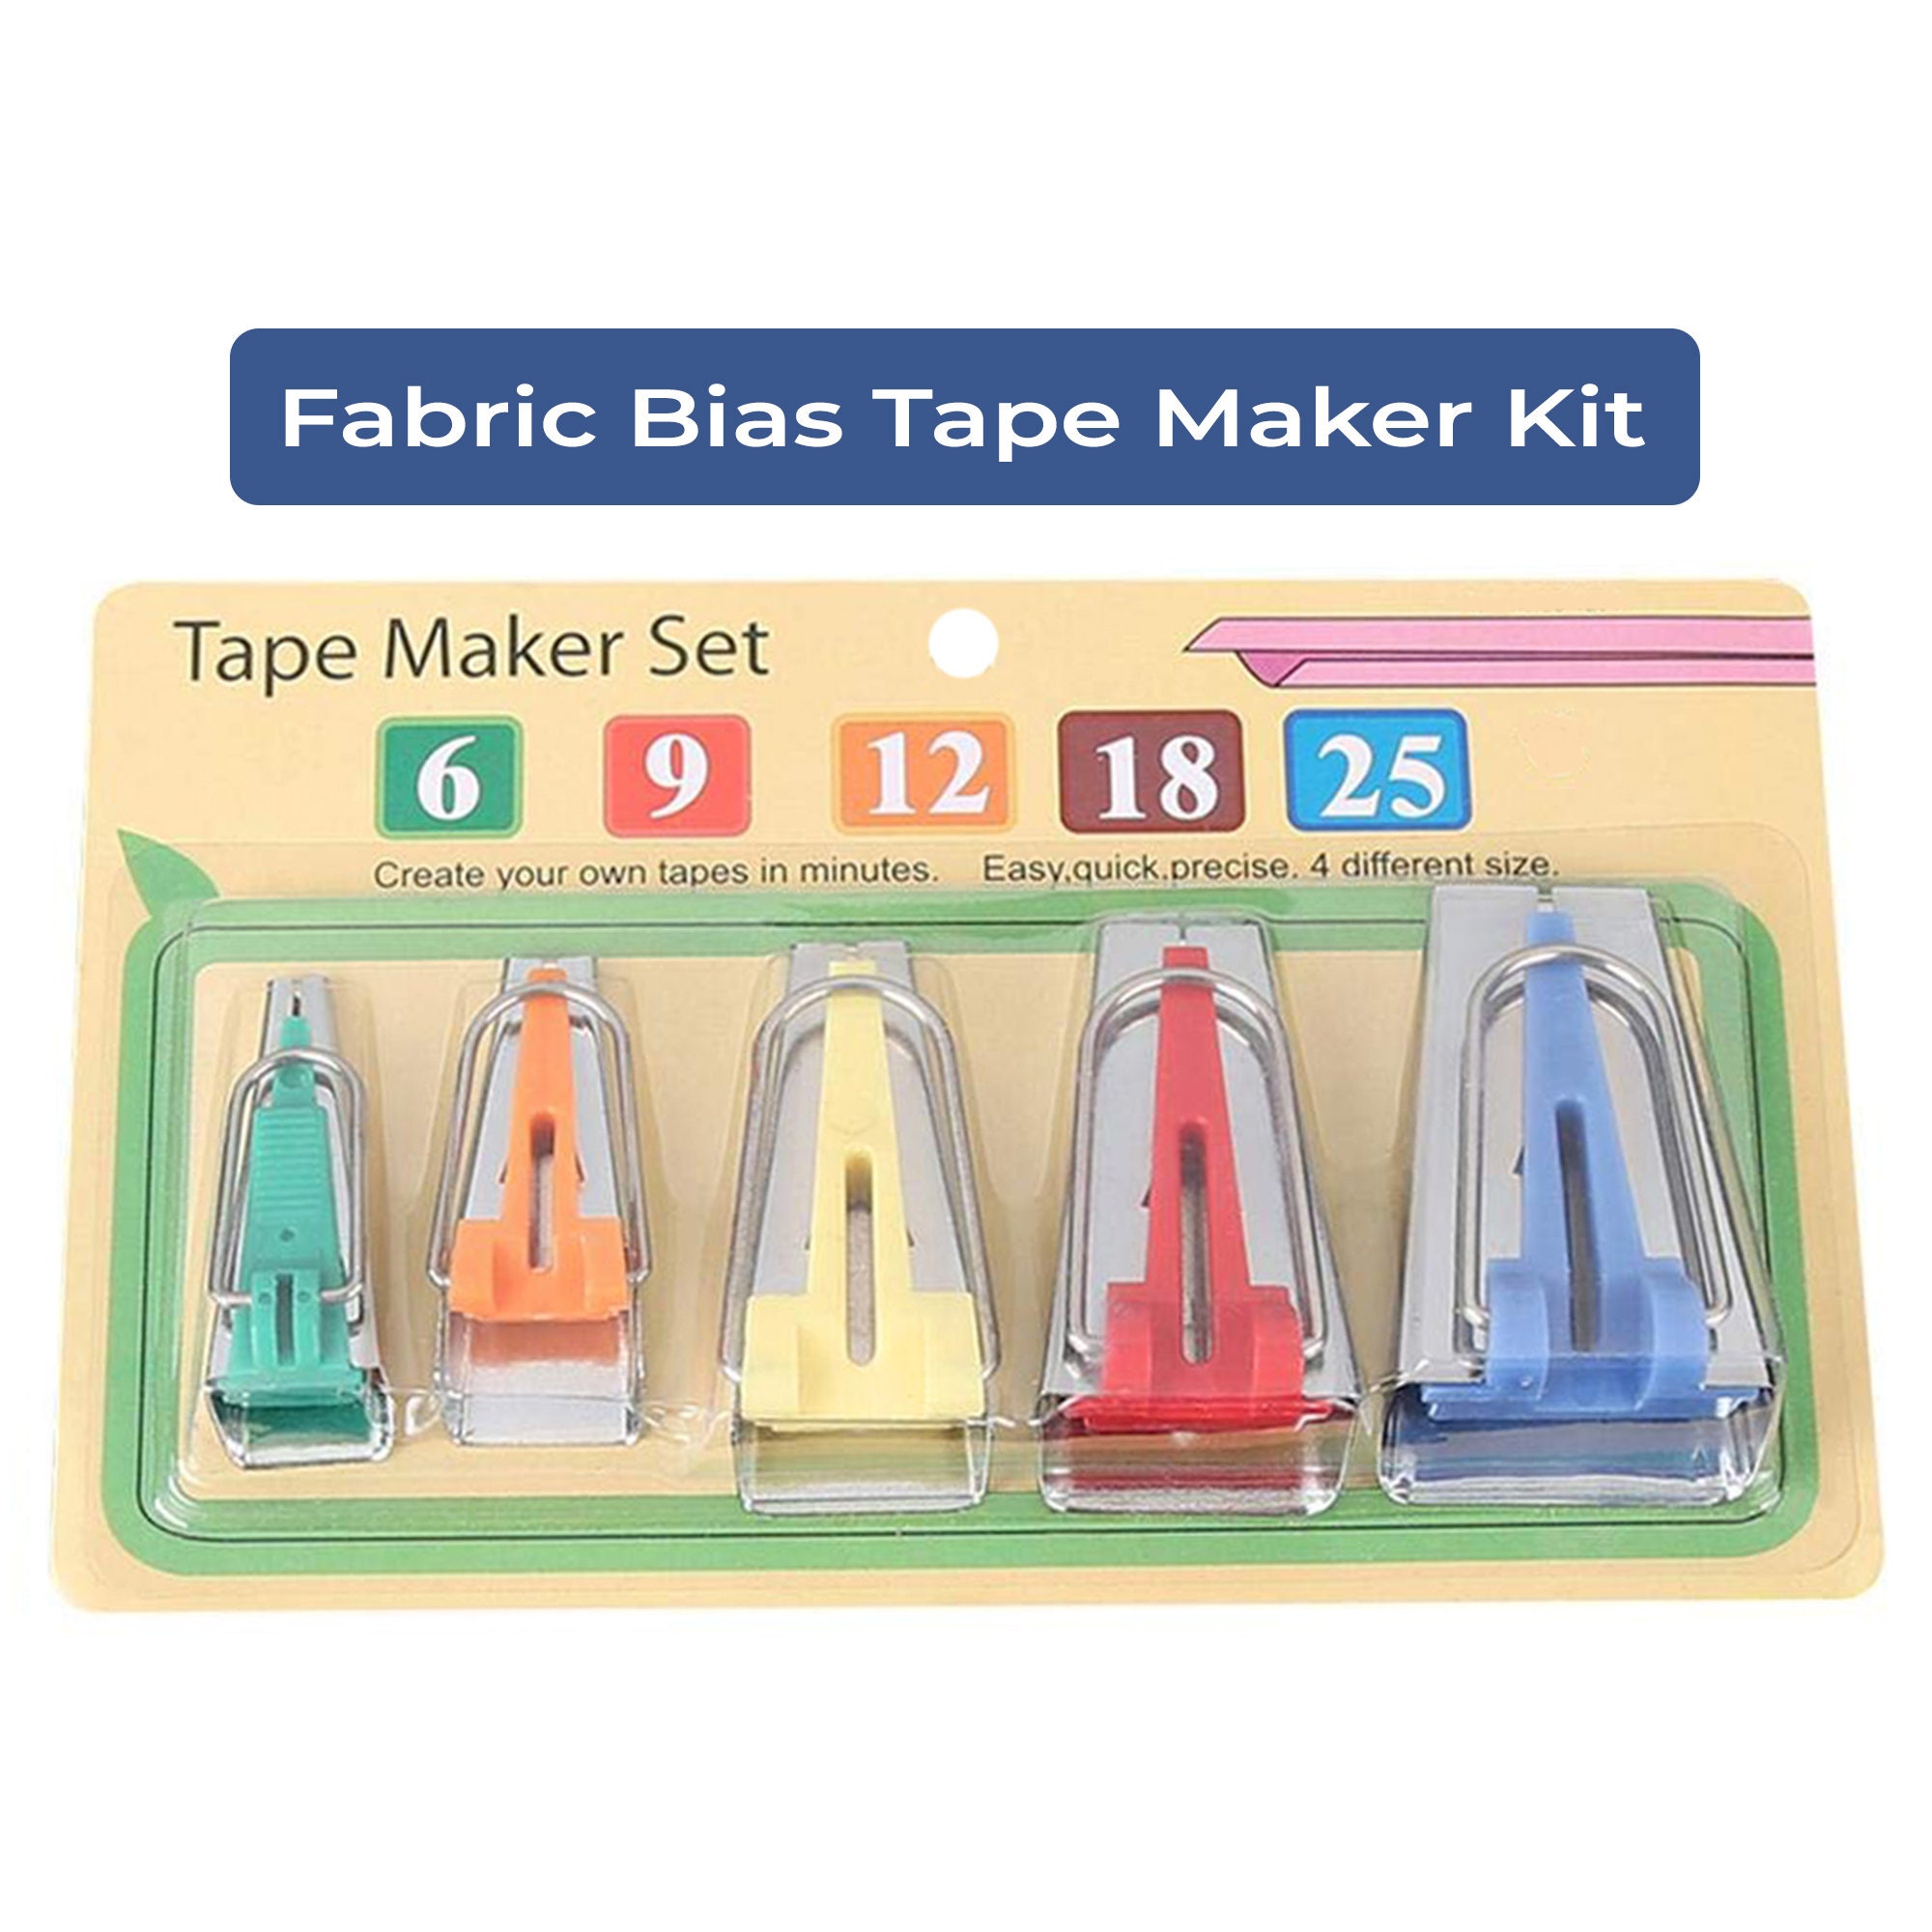 Simplicity Bias Tape Maker with Six Tips